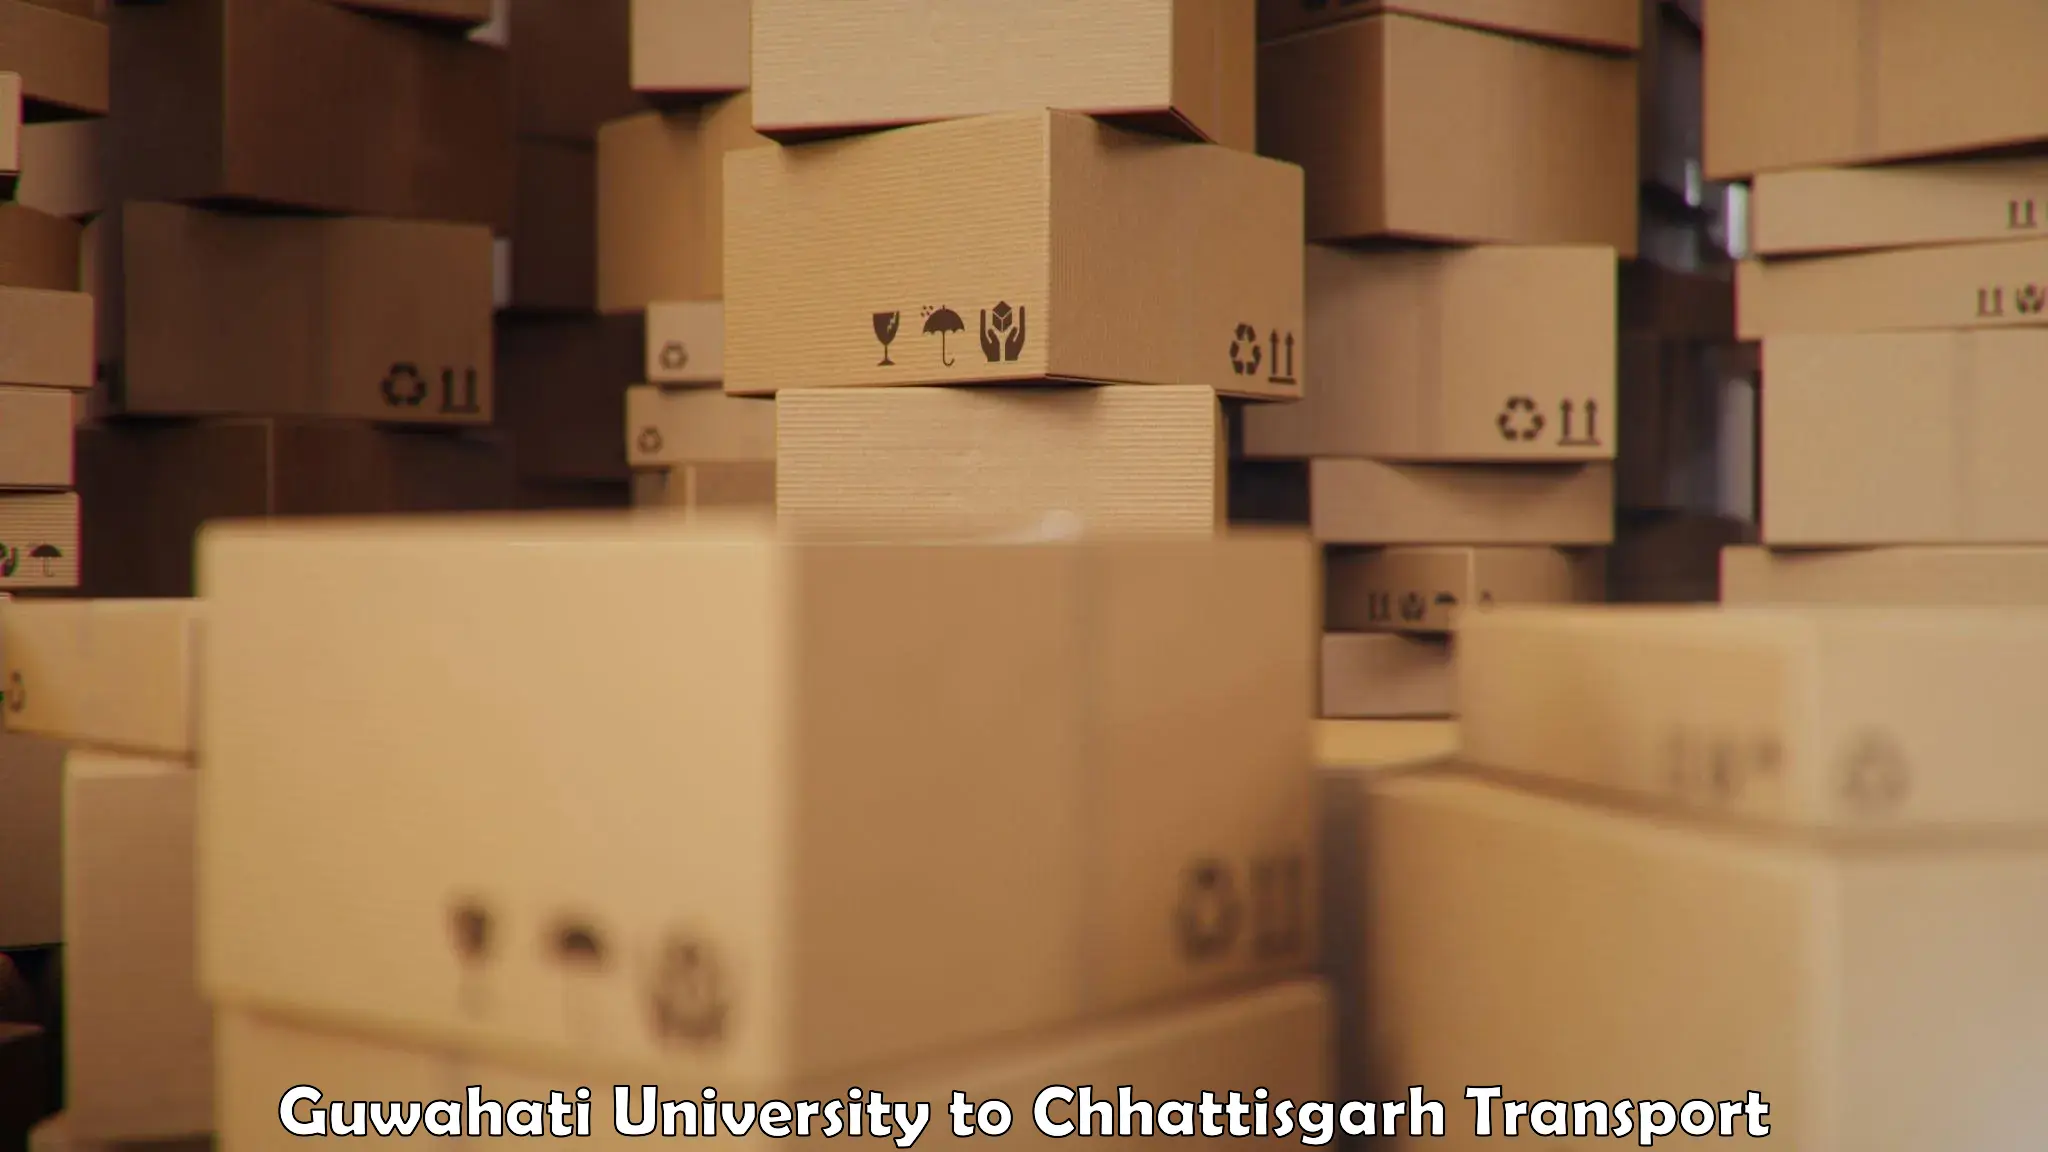 Package delivery services Guwahati University to Chhattisgarh